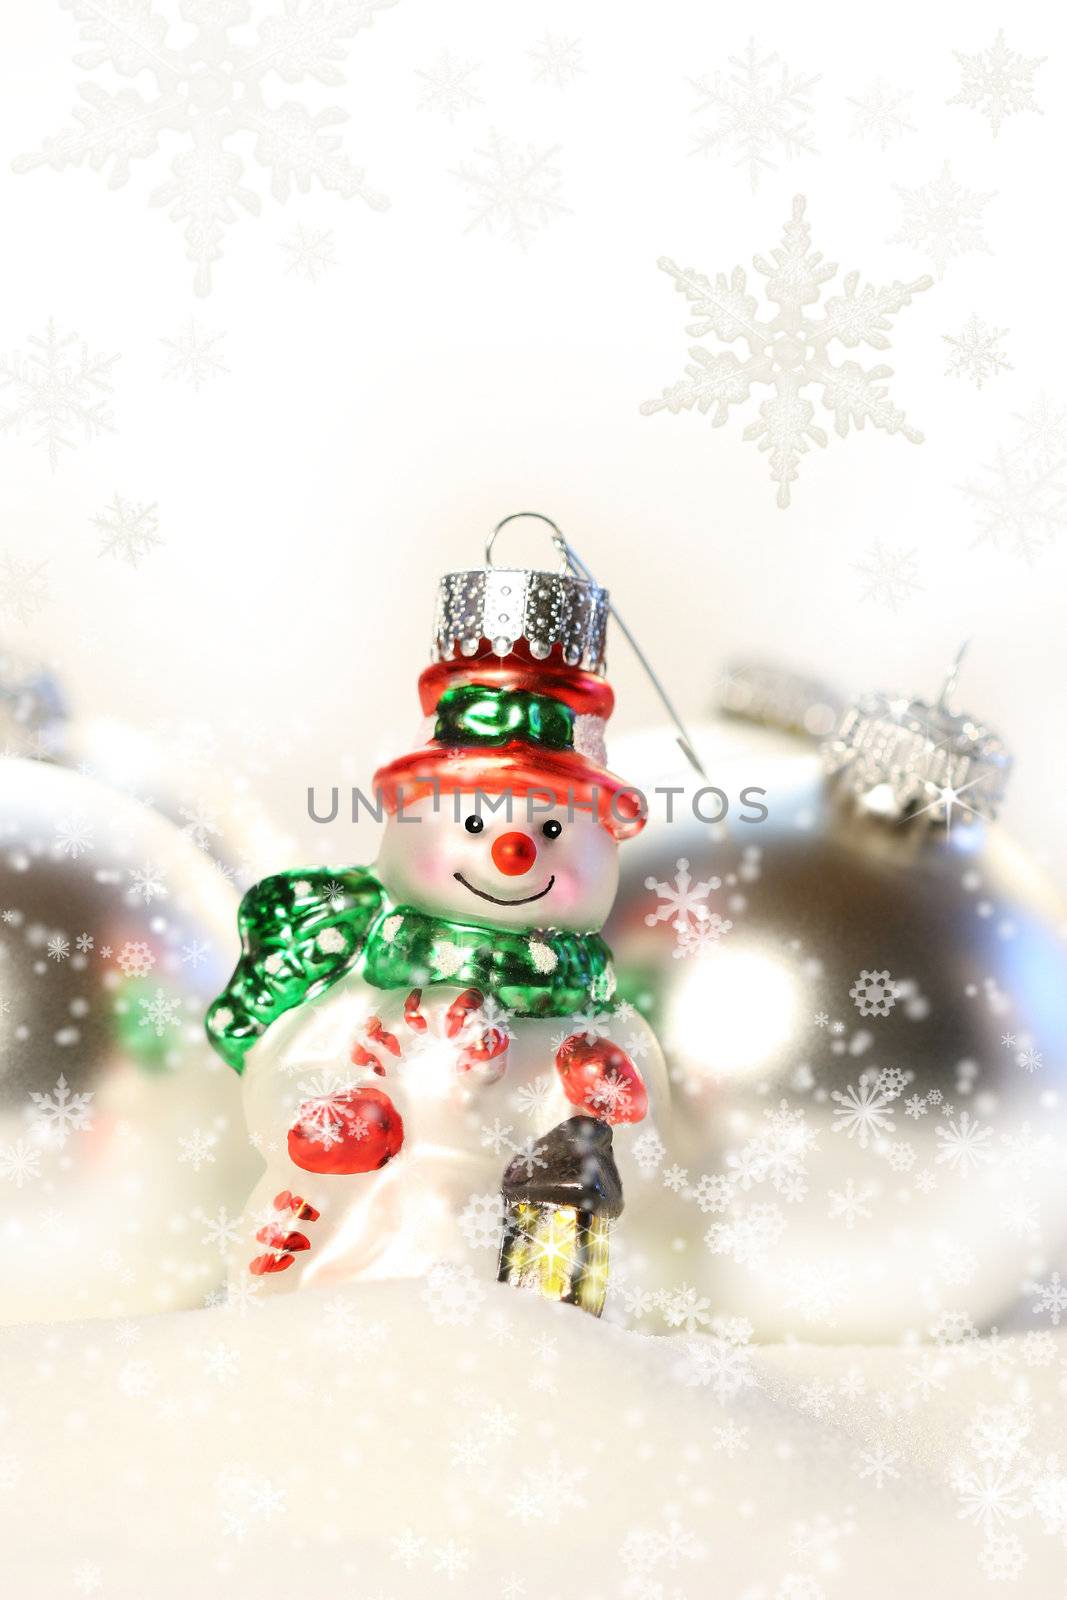 Little snowman ornament in the snow with white background